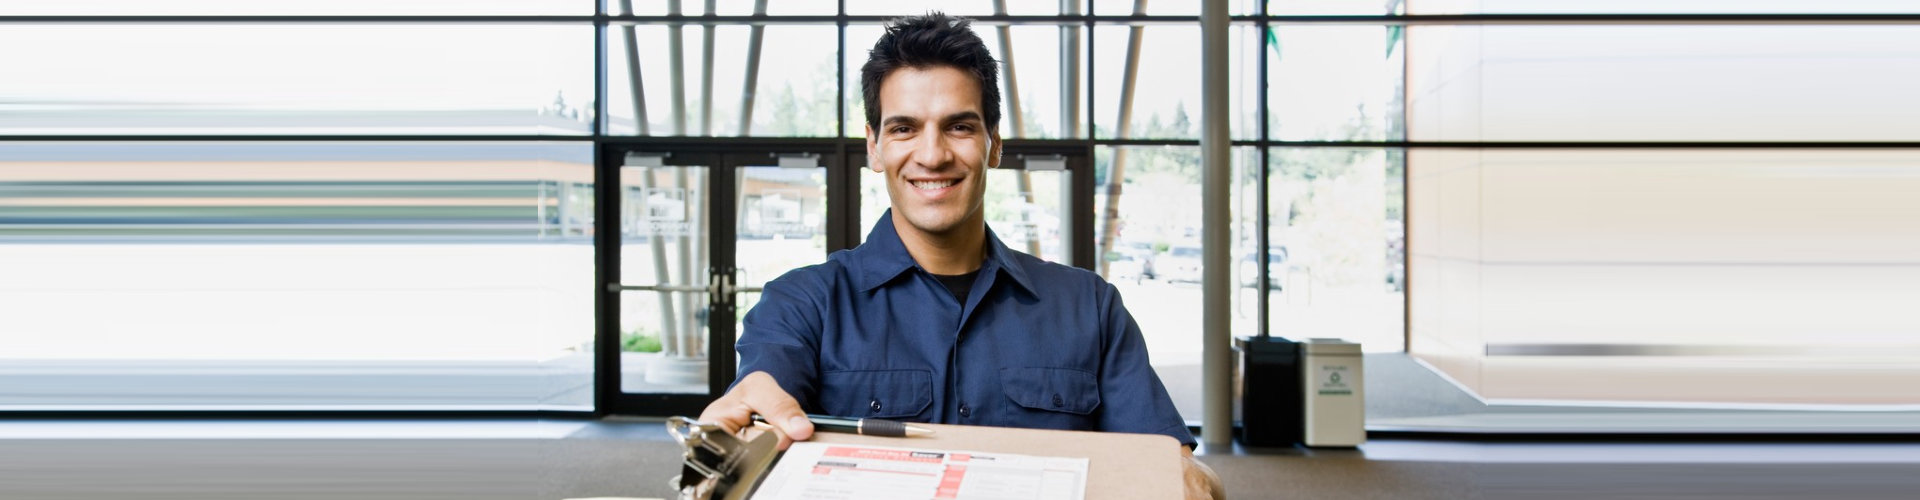 smiling delivery man